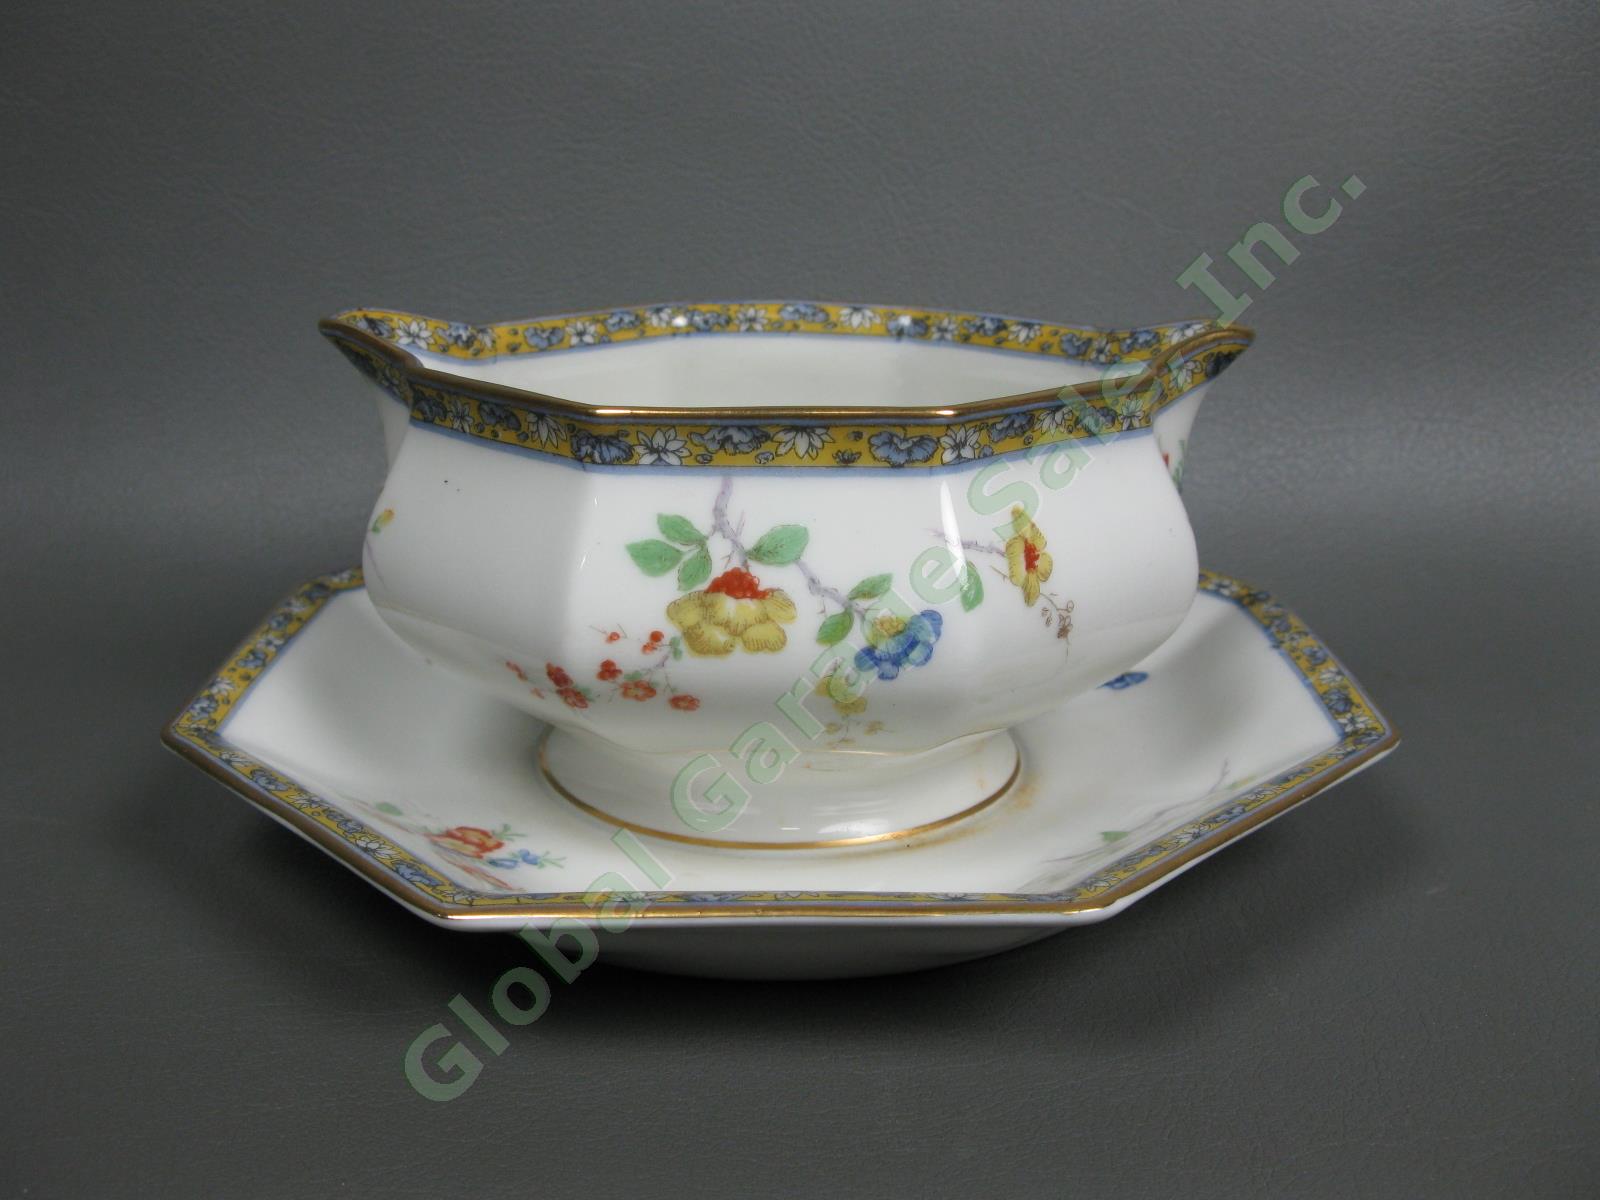 Theodore Haviland Montreux Mongolia Gravy Boat Dish Attached Underplate Limoges